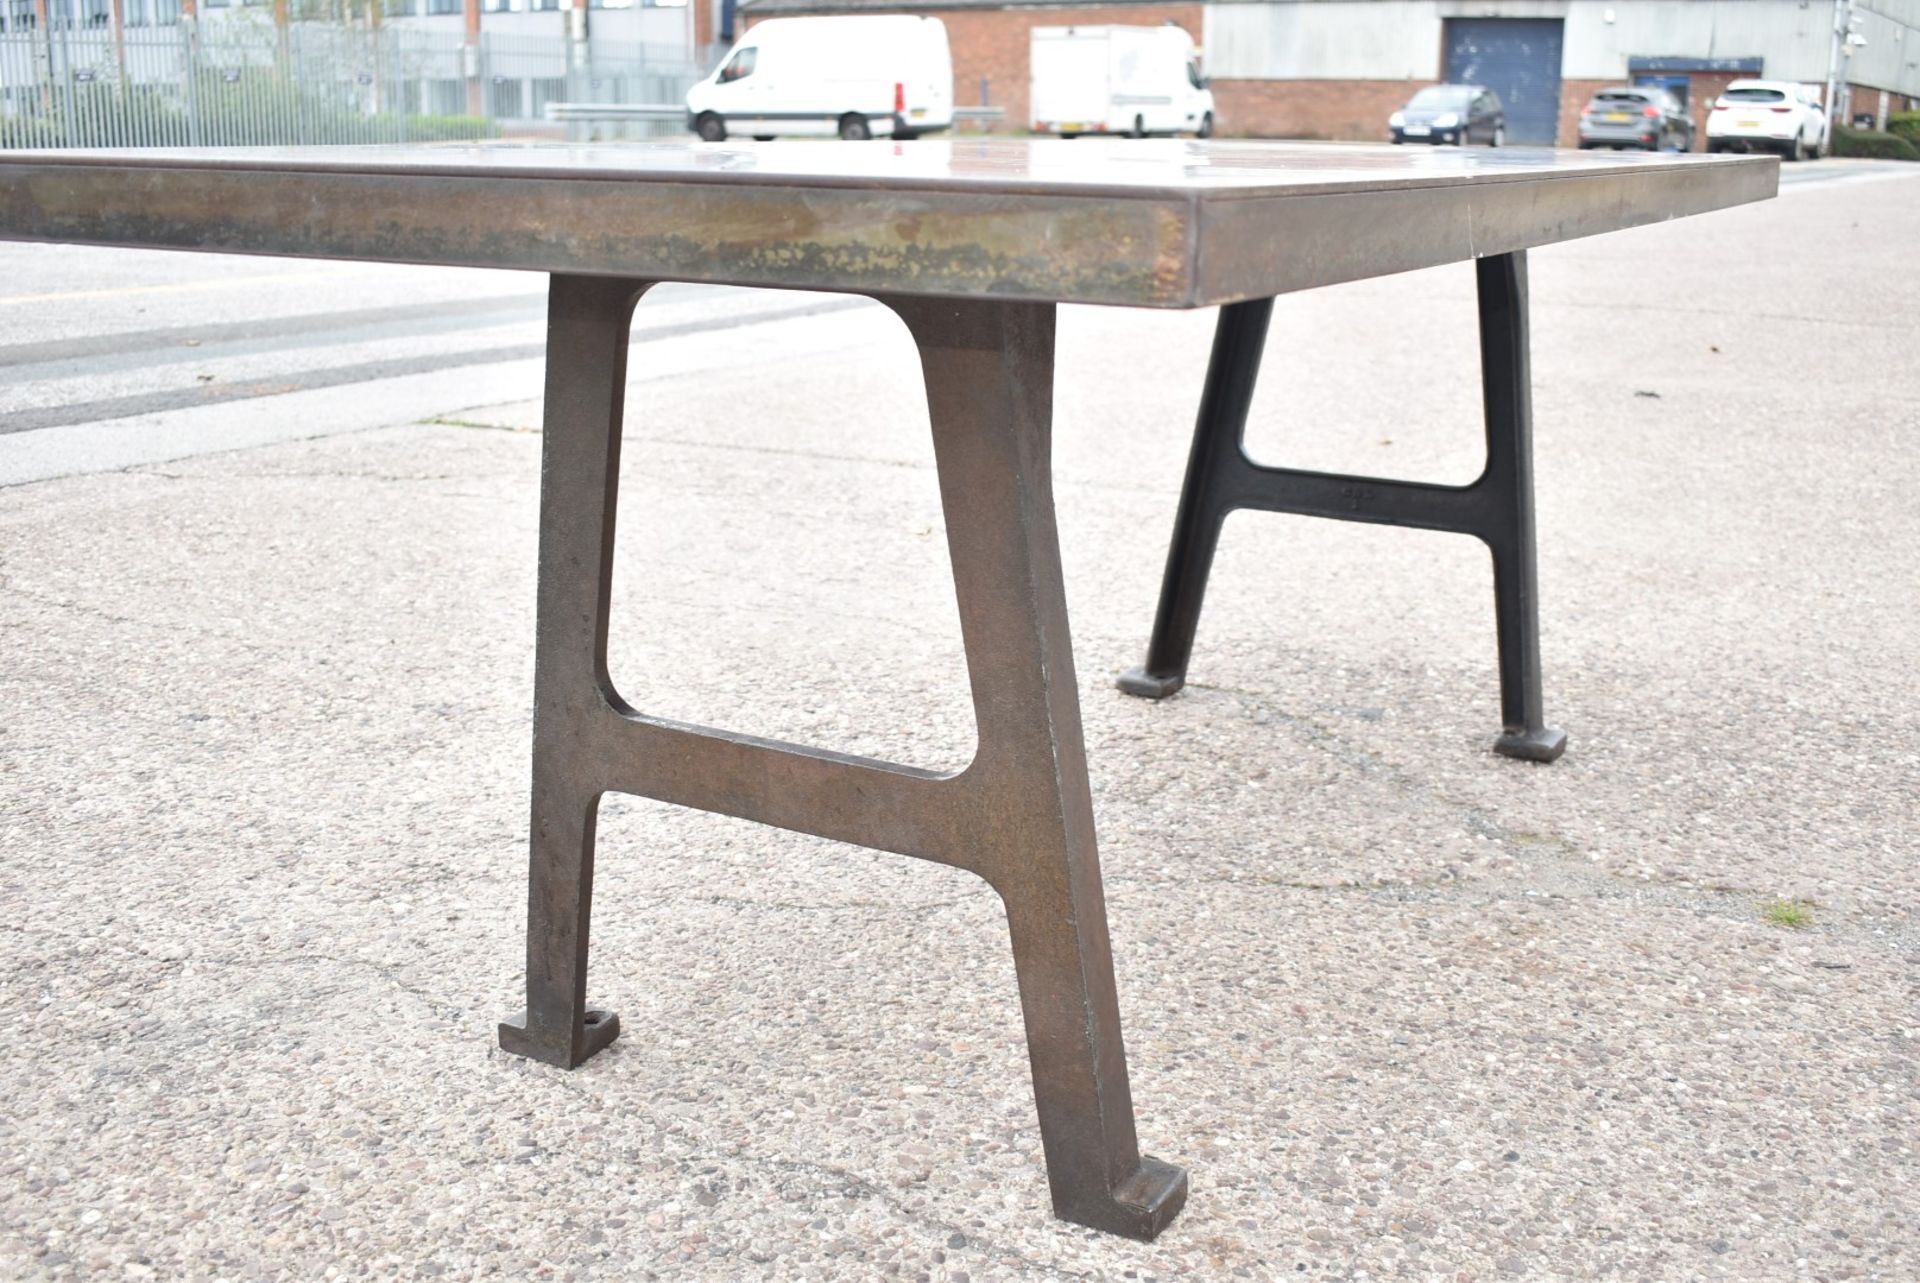 1 x Industrial Style 200cm Banquetting Restaurant Table Featuring a Heavy Steel Top & Steel Legs - Image 17 of 23